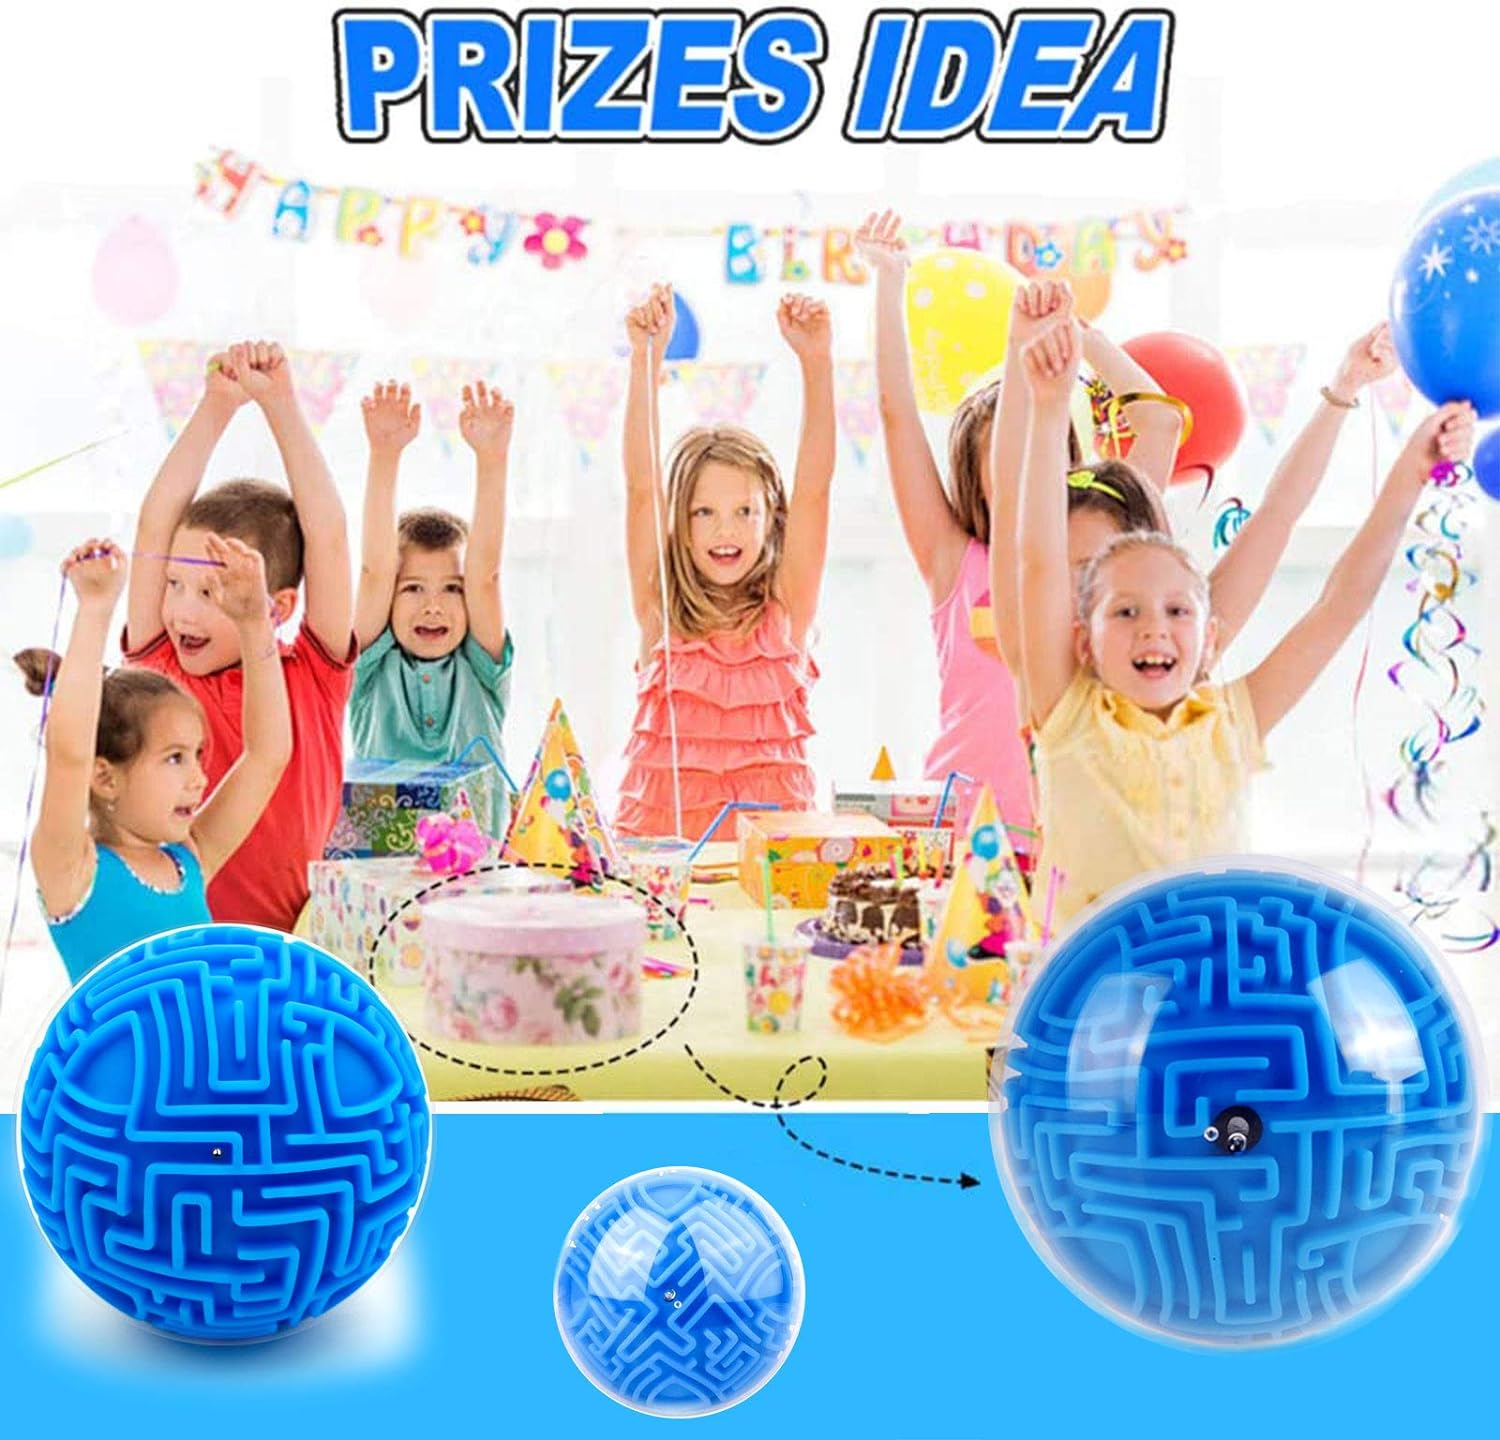 Amaze 3D Memory Sequential Maze Ball Puzzle Toy - Challenges Game Lover Tiny Balls Brain Teasers